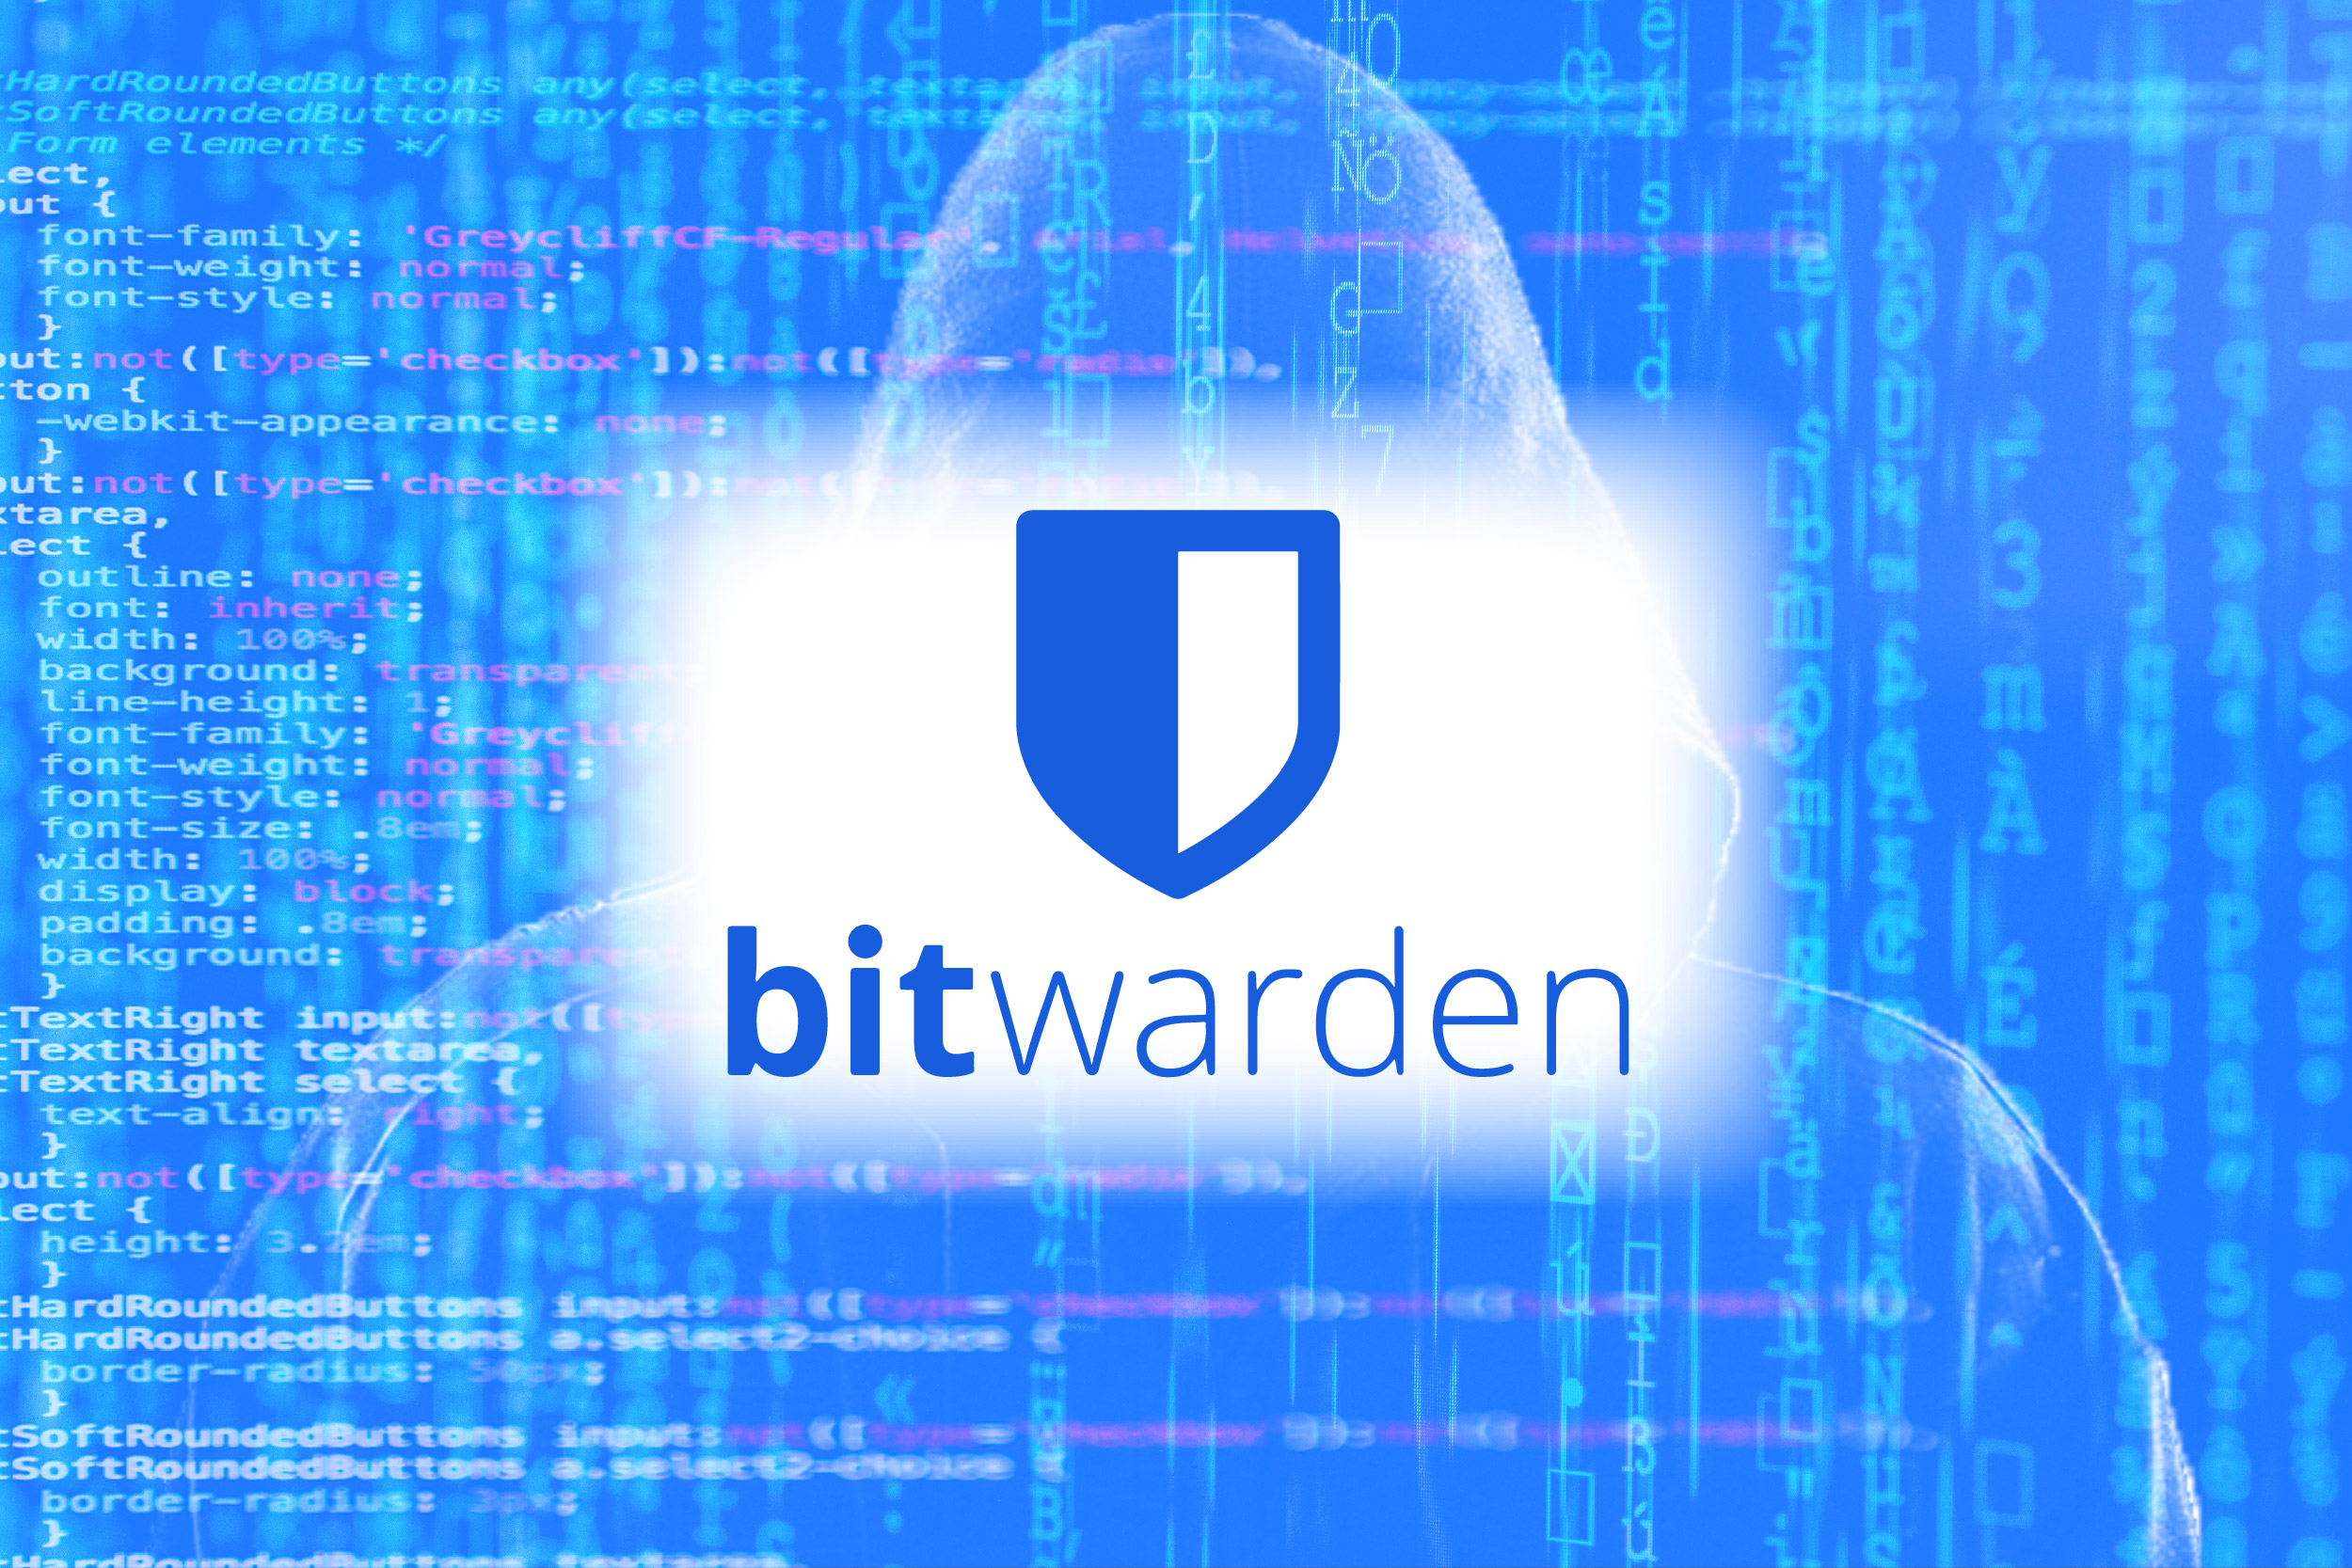 Researchers Reported About Bitwardens Autofill Feature Flaw that